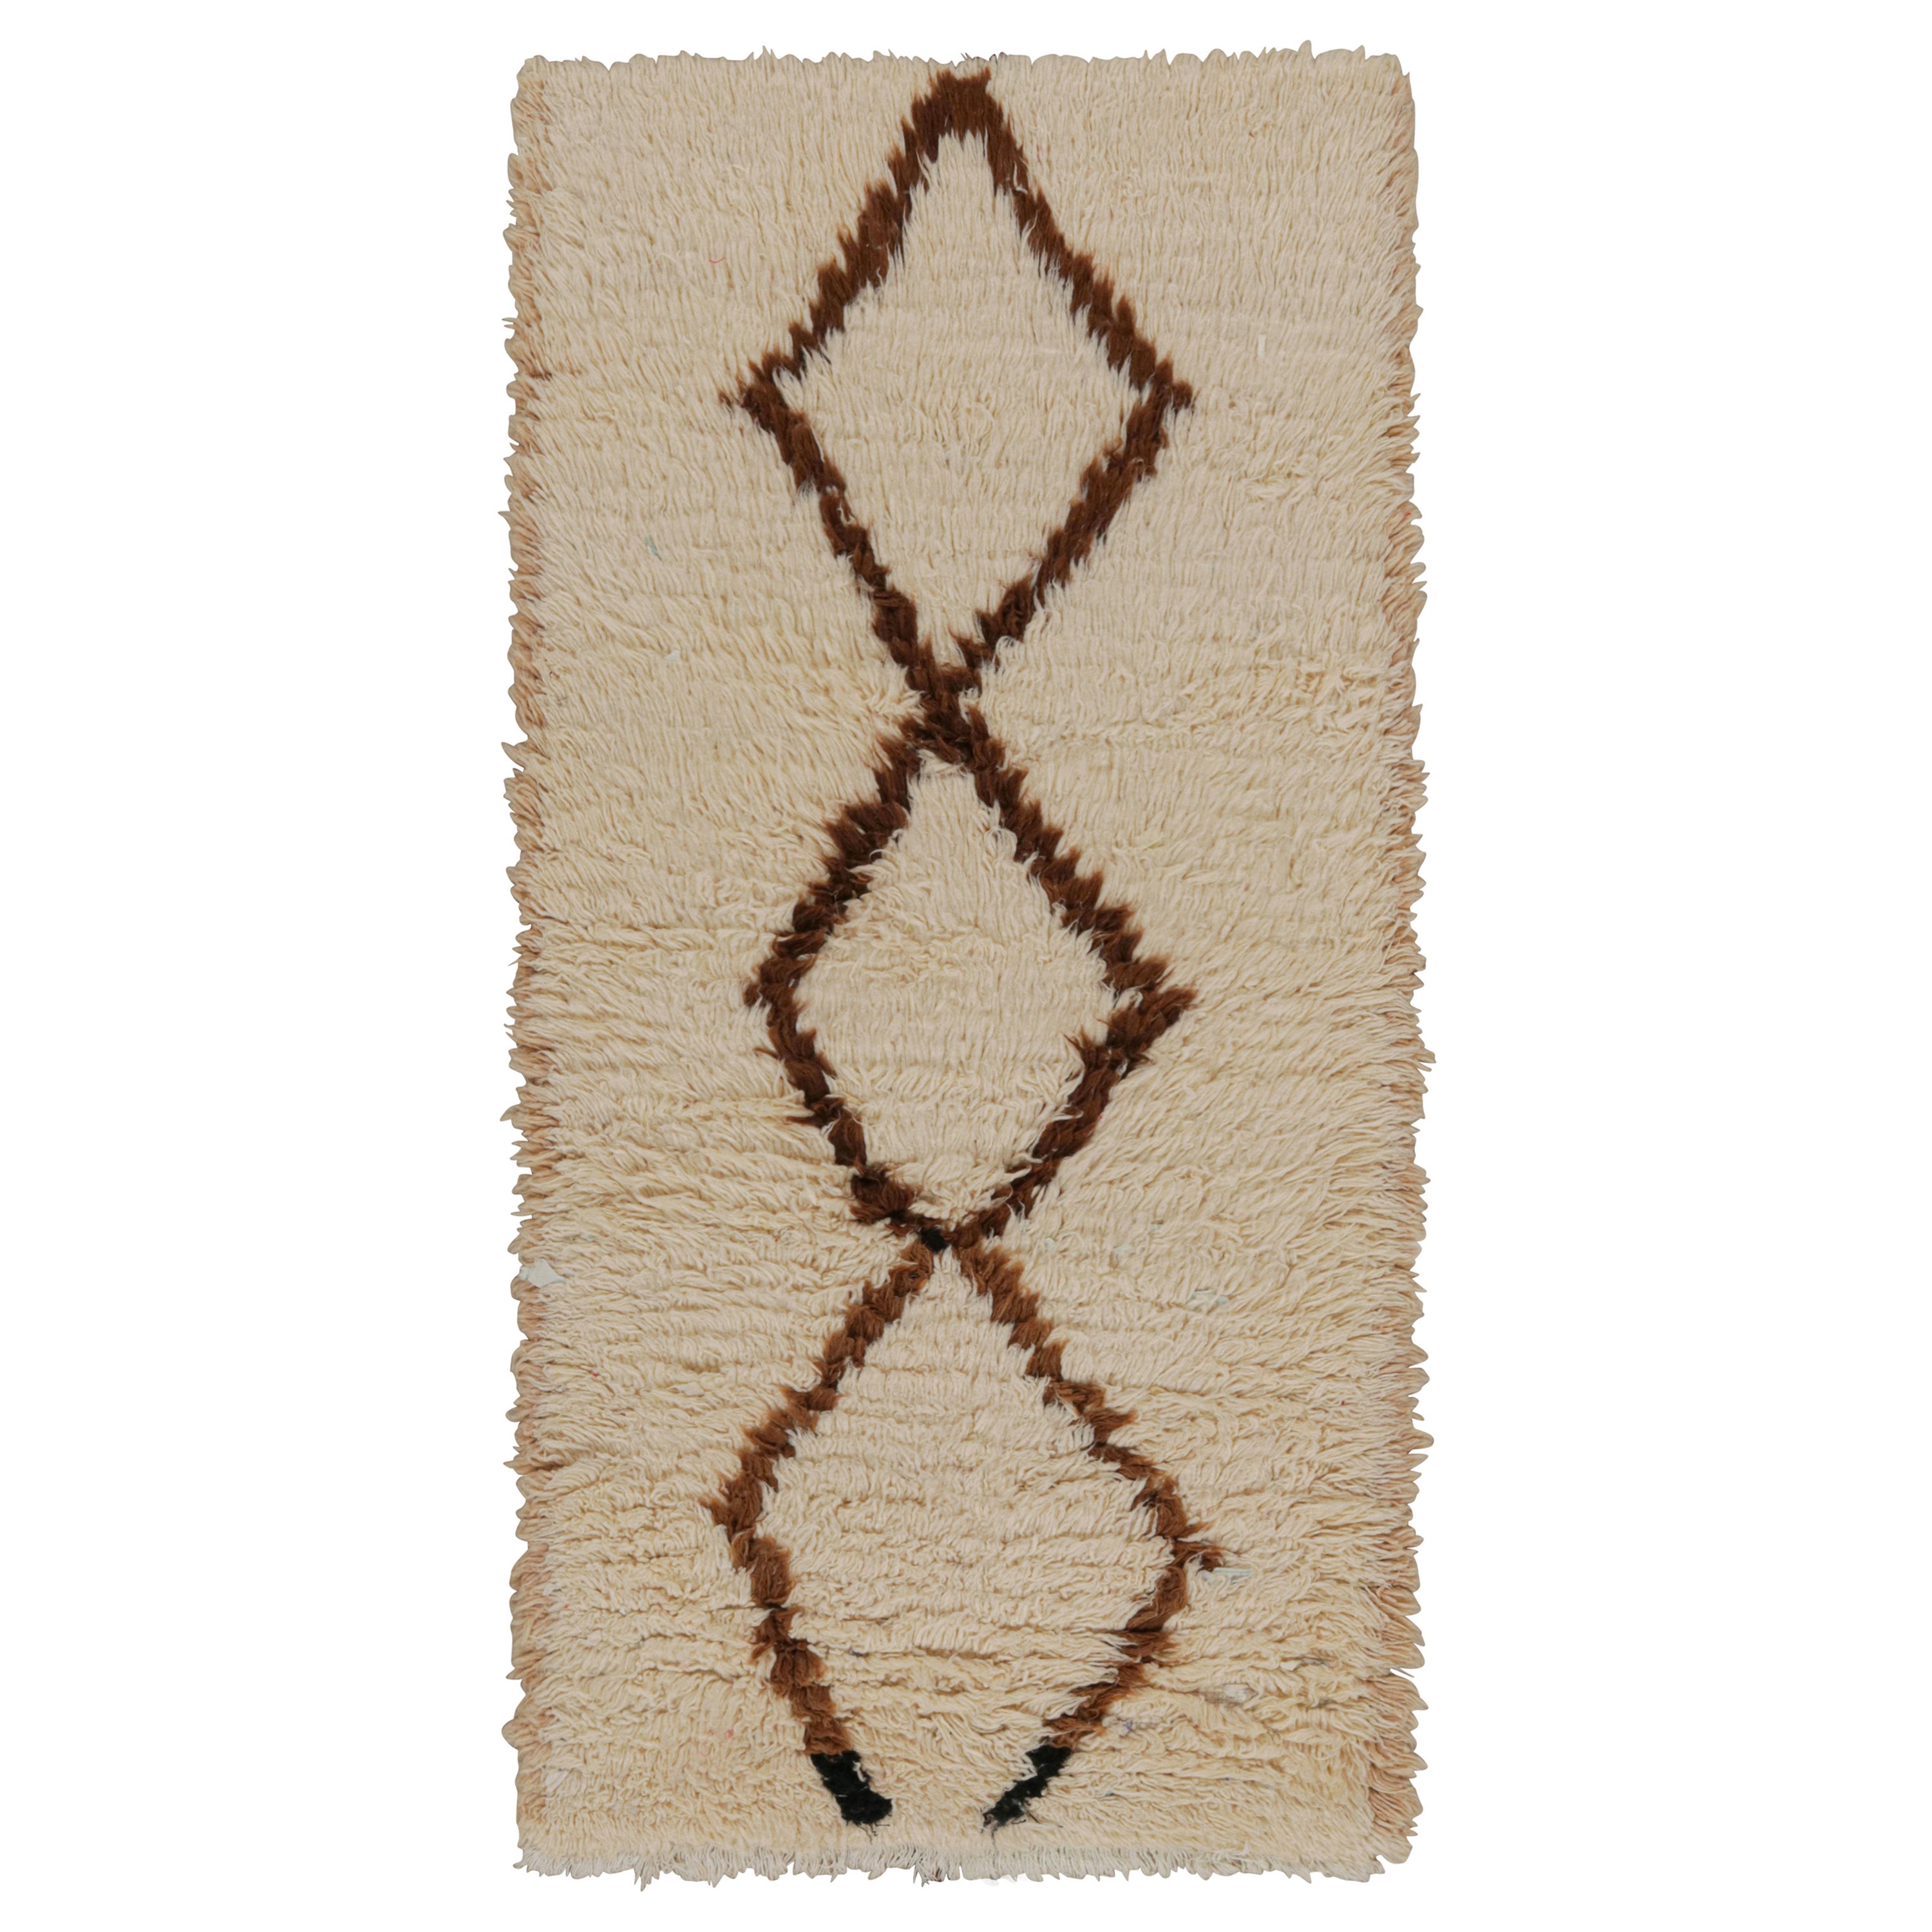 Vintage Moroccan Runner Rug with Stripes & Diamond Medallions, from Rug & Kilim  For Sale